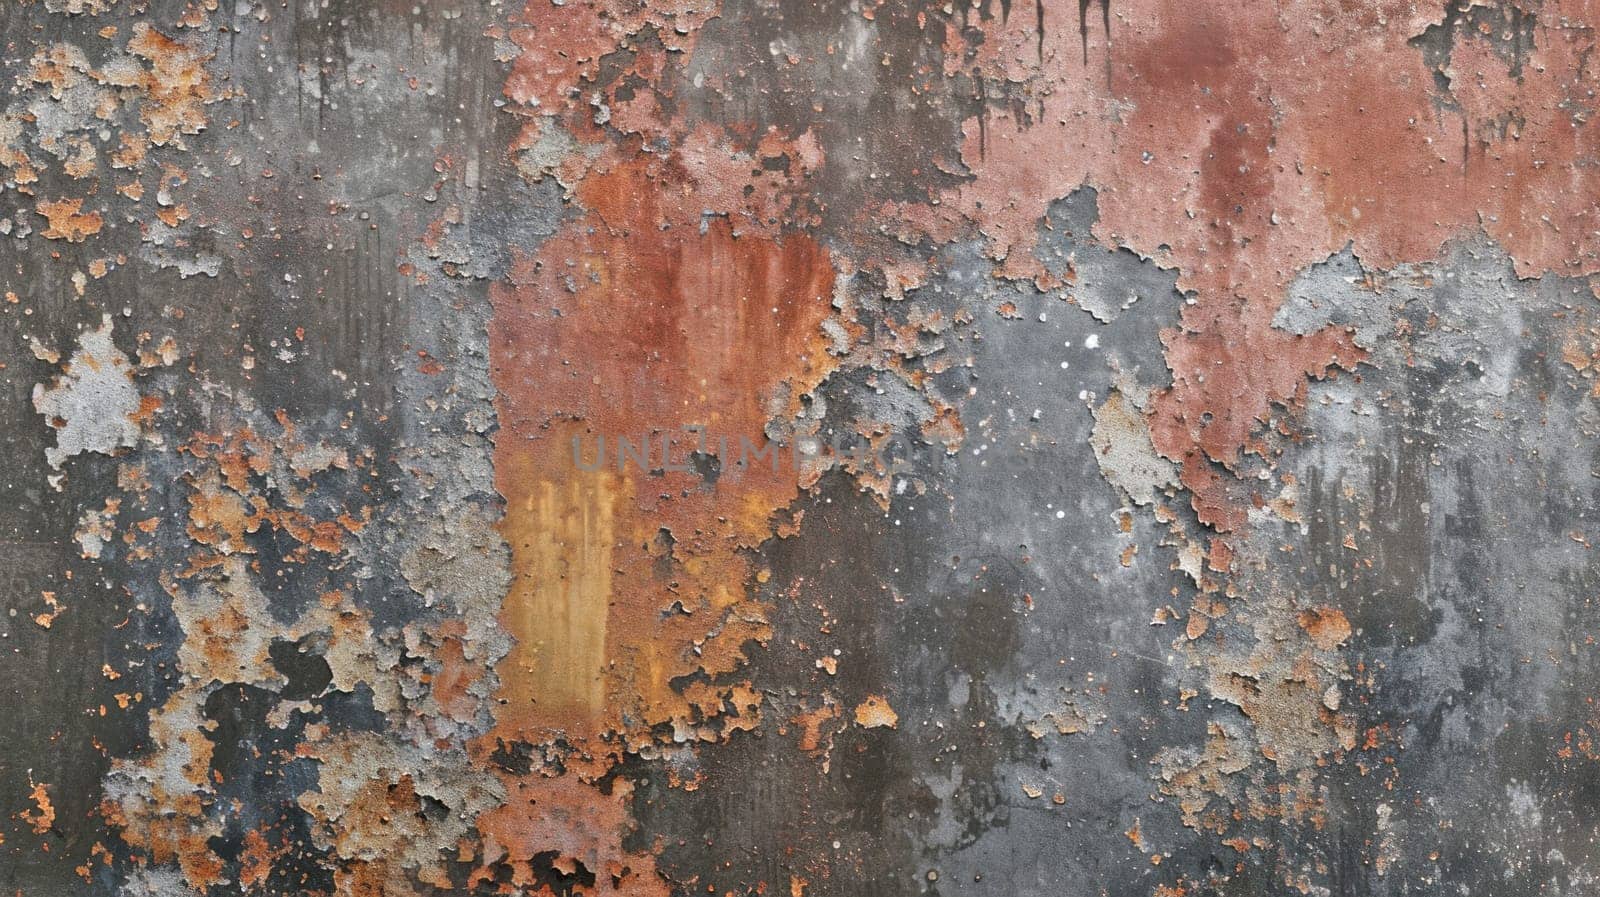 Multicolored grunge texture. Created using AI generated technology and image editing software.